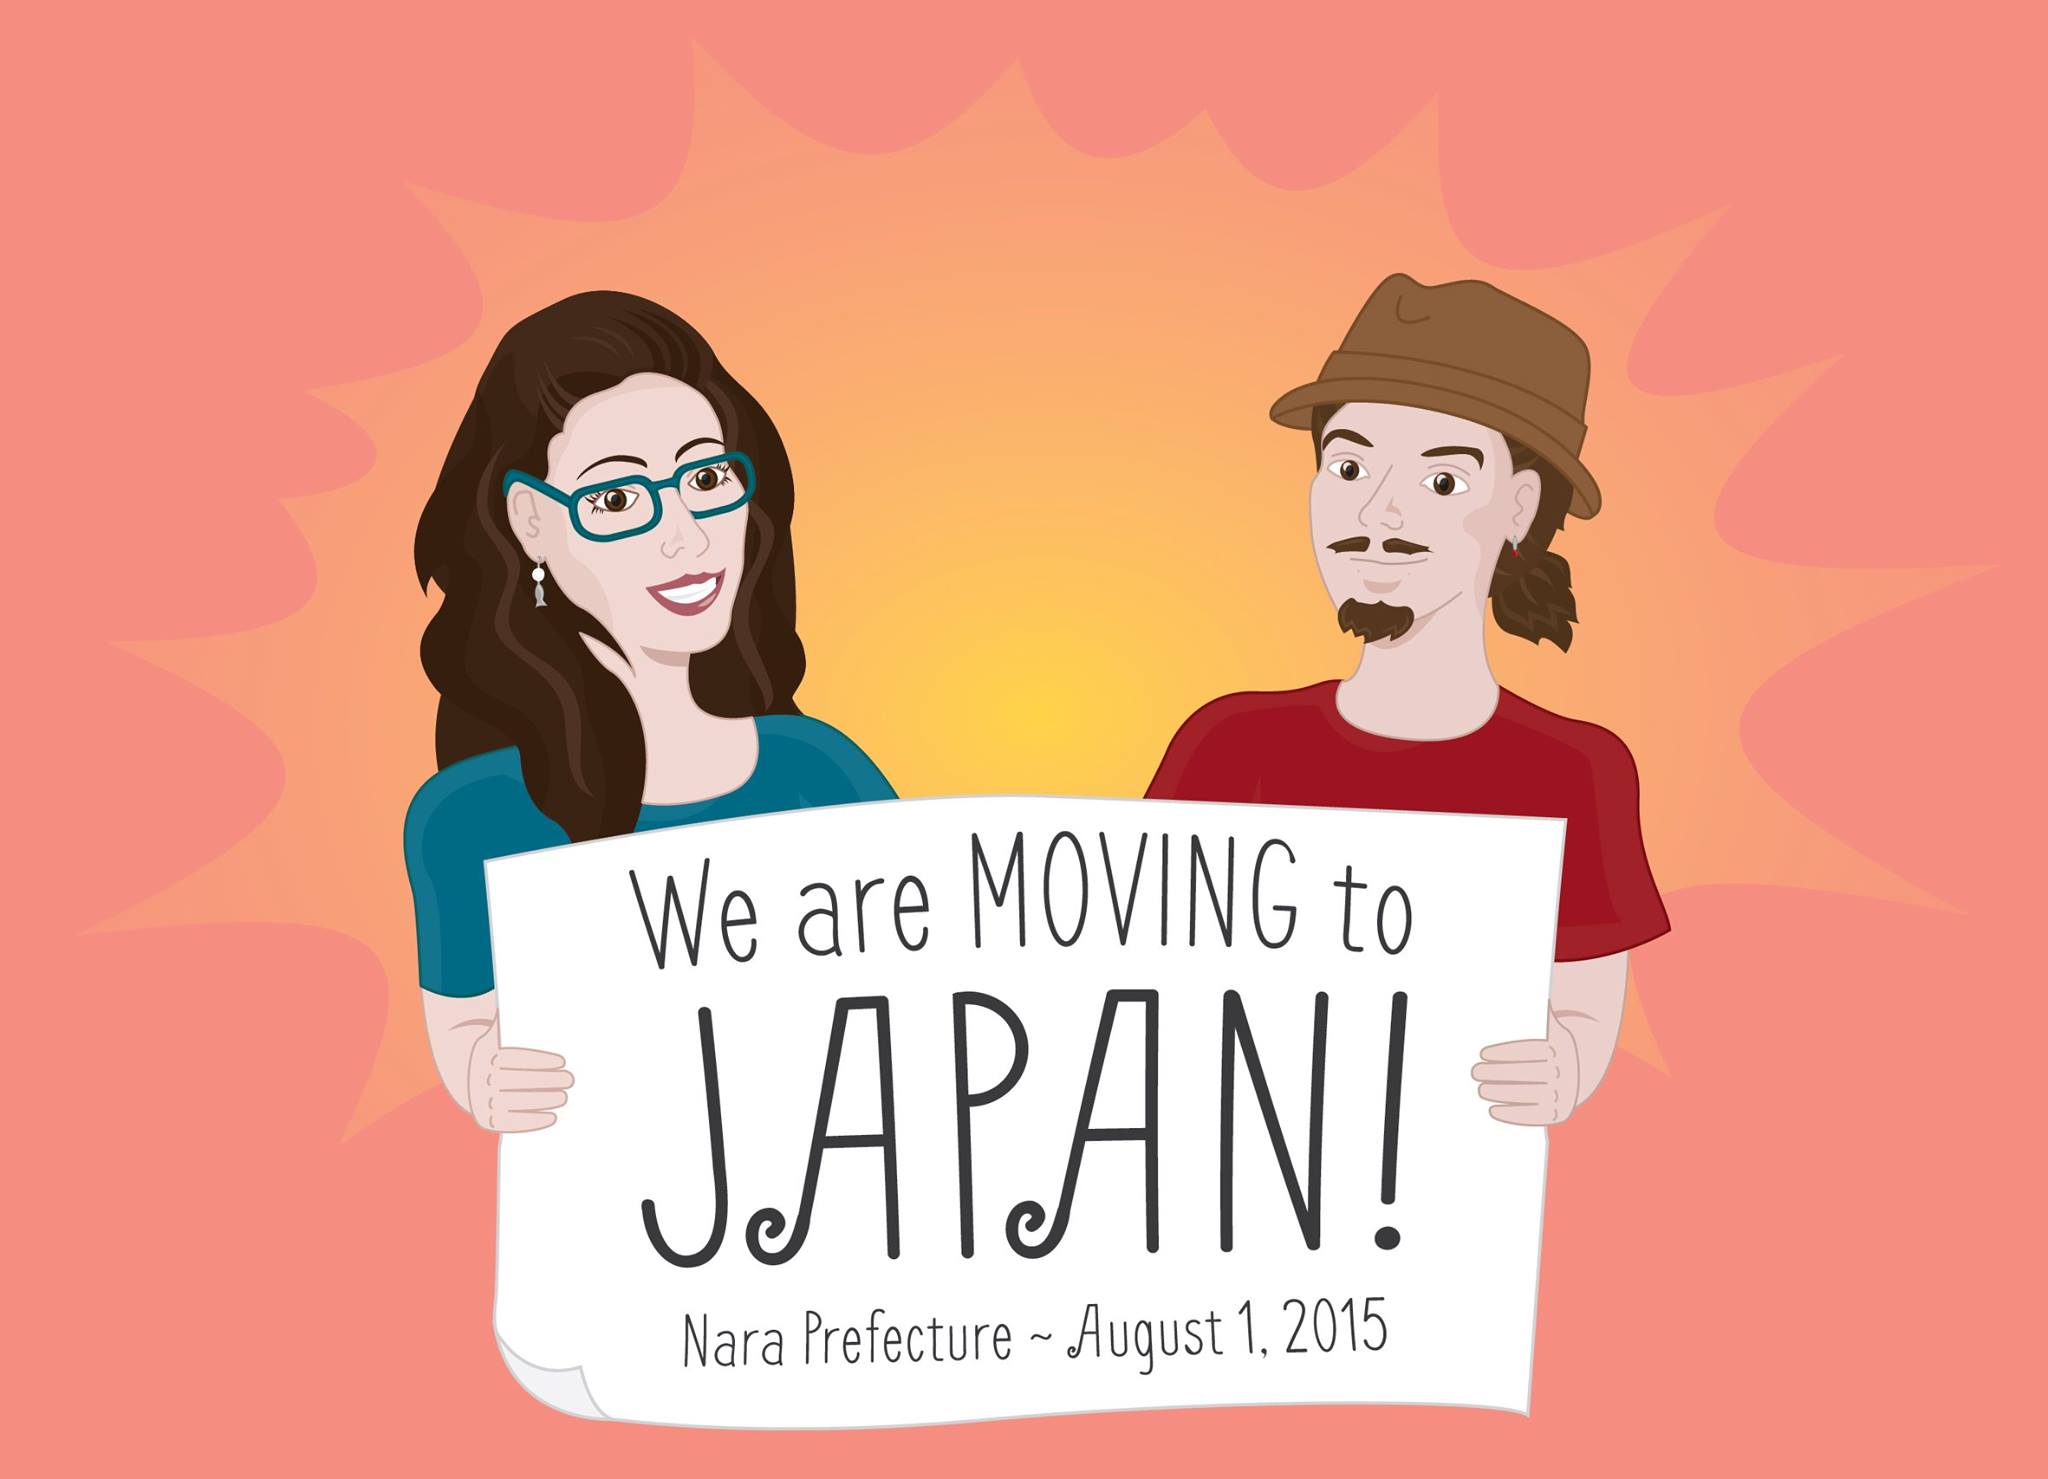 We are MOVING to Japan!